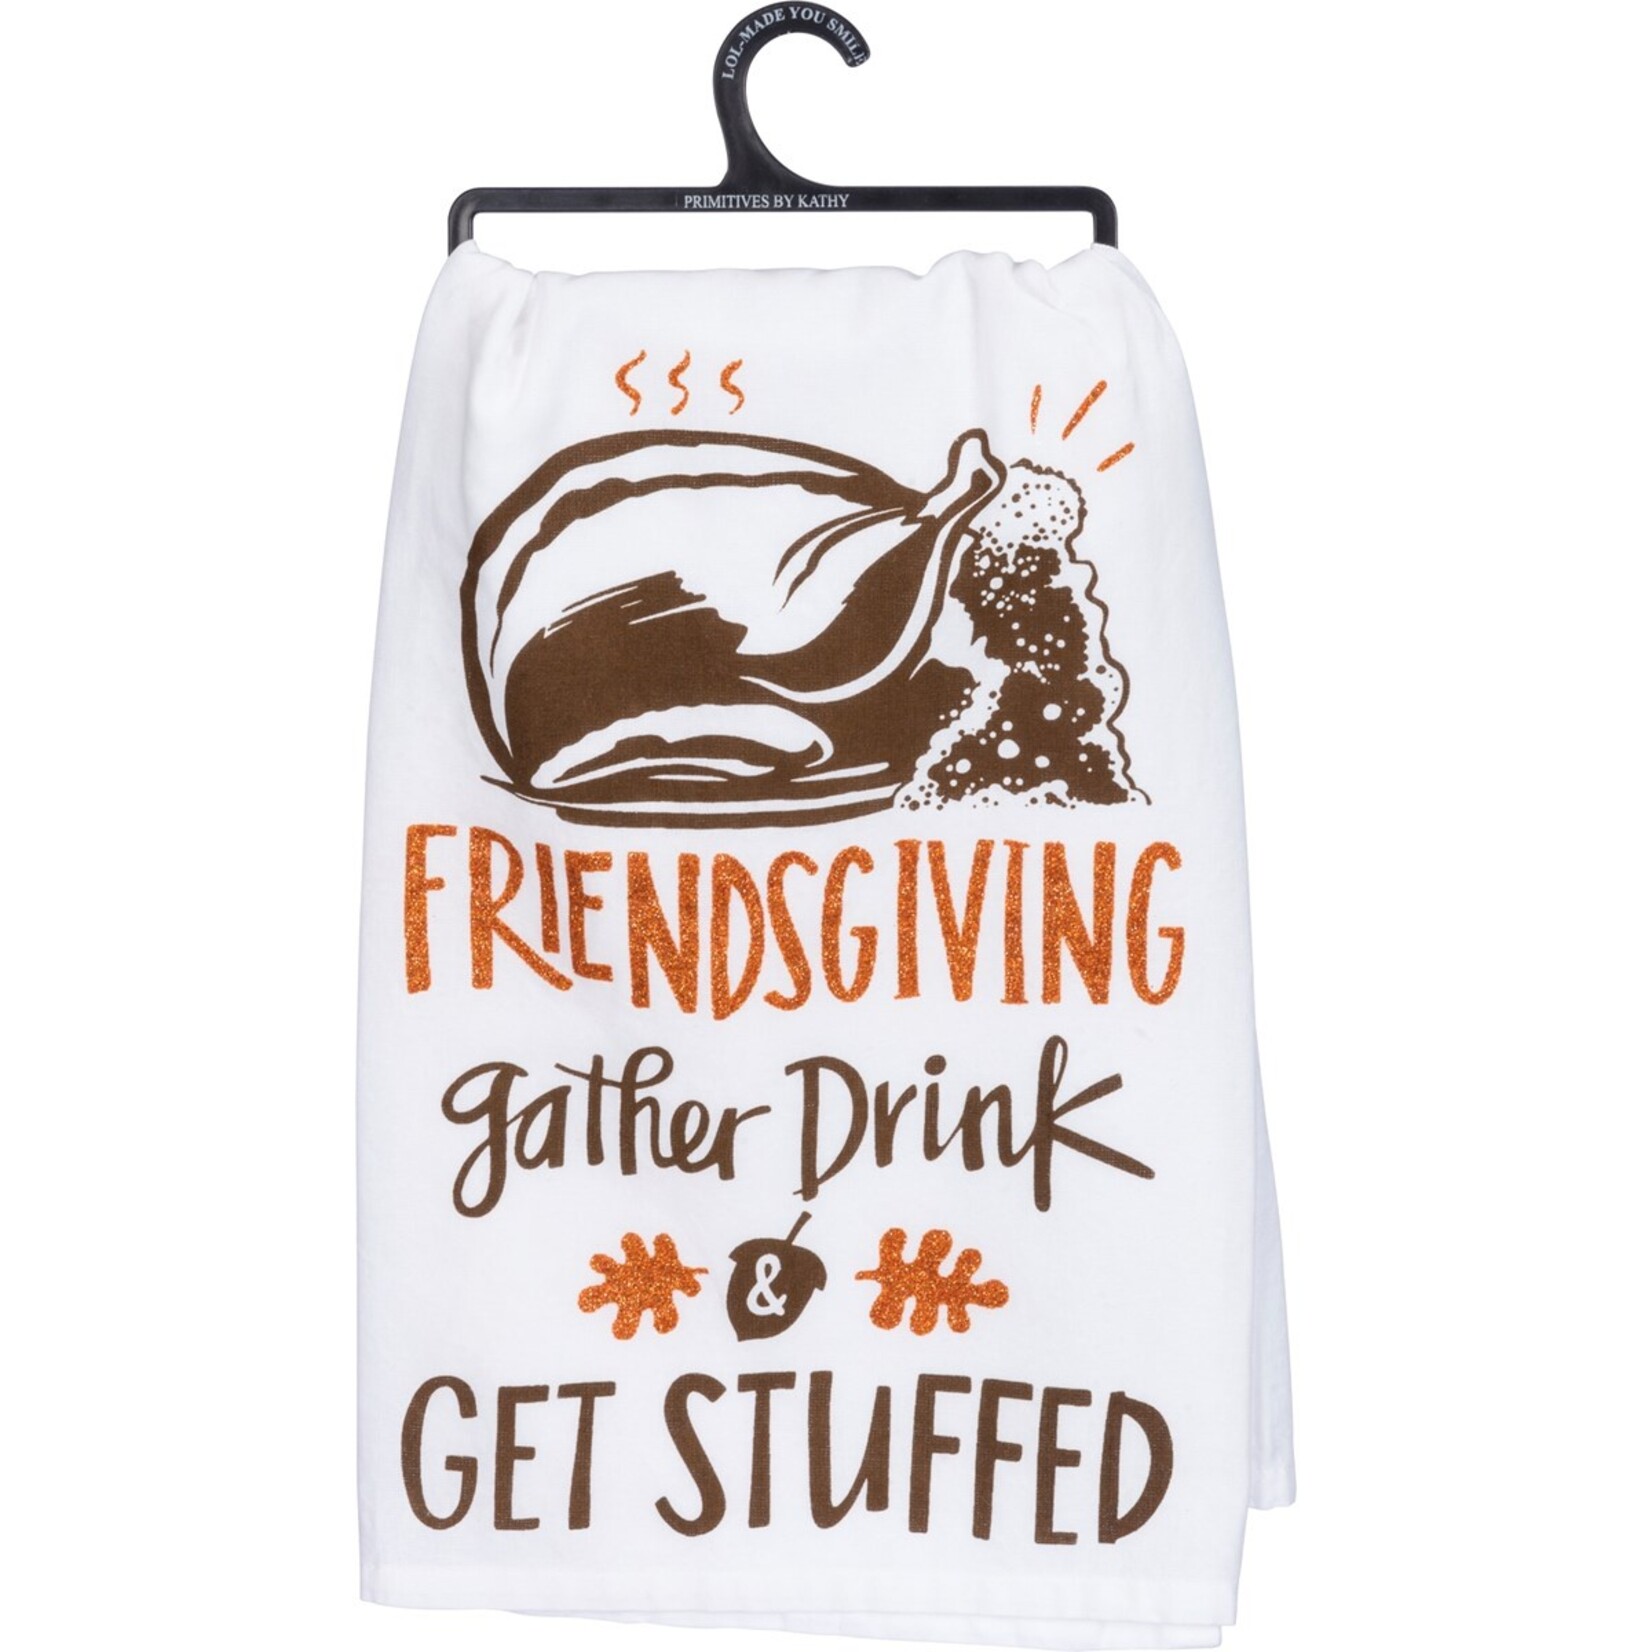 Primitives by Kathy Primitives by Kathy-Friendsgiving Get Stuffed Kitchen Towel